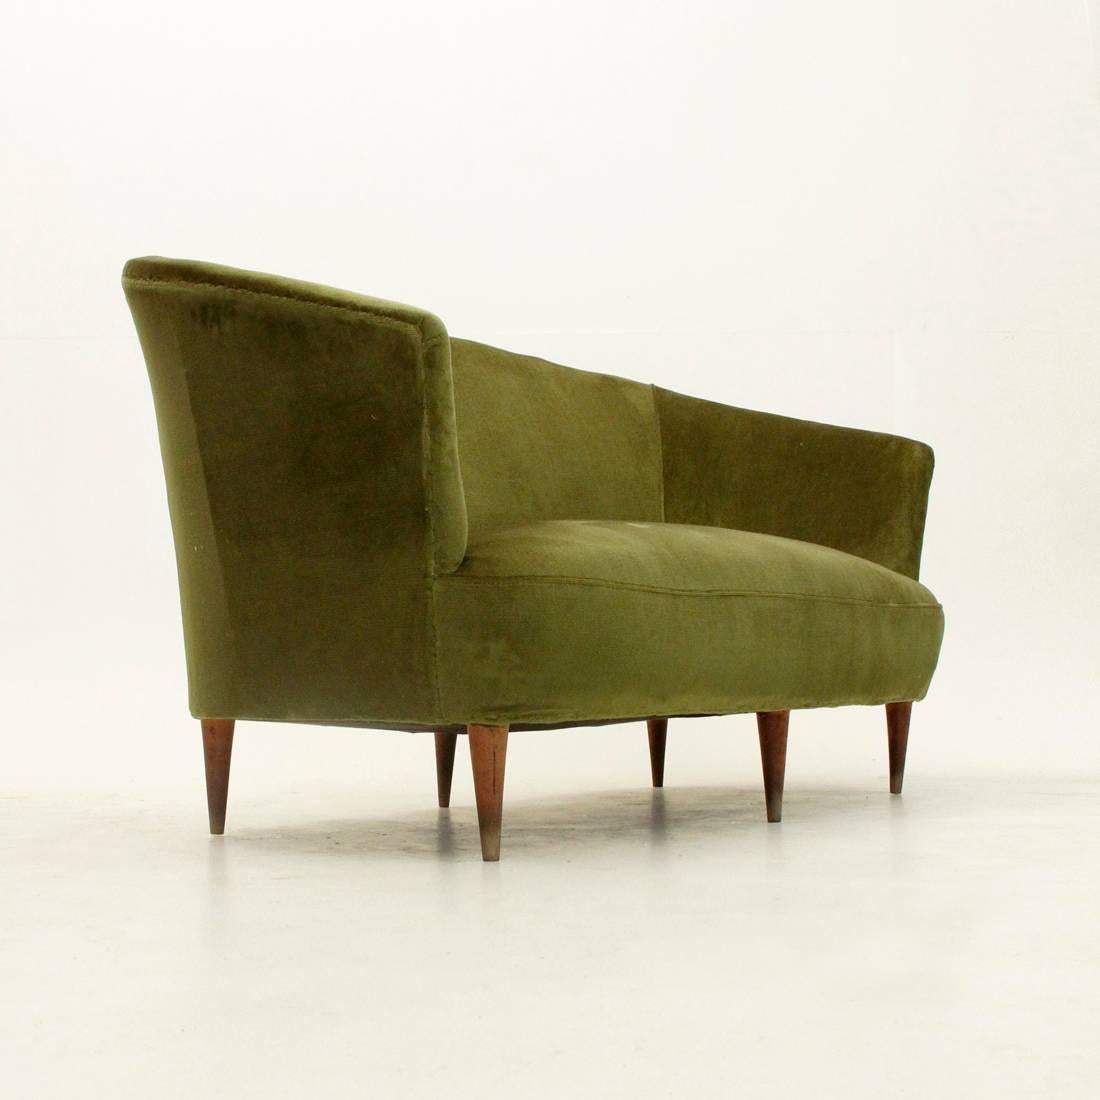 Sofa produced in the 1940s.
Upholstered and lined wooden structure with original green velvet fabric.
Conical shaped turned wood legs.
Structure in good condition, woven with some stain and alone.

Dimensions: Width 150 cm, depth 75 cm, height